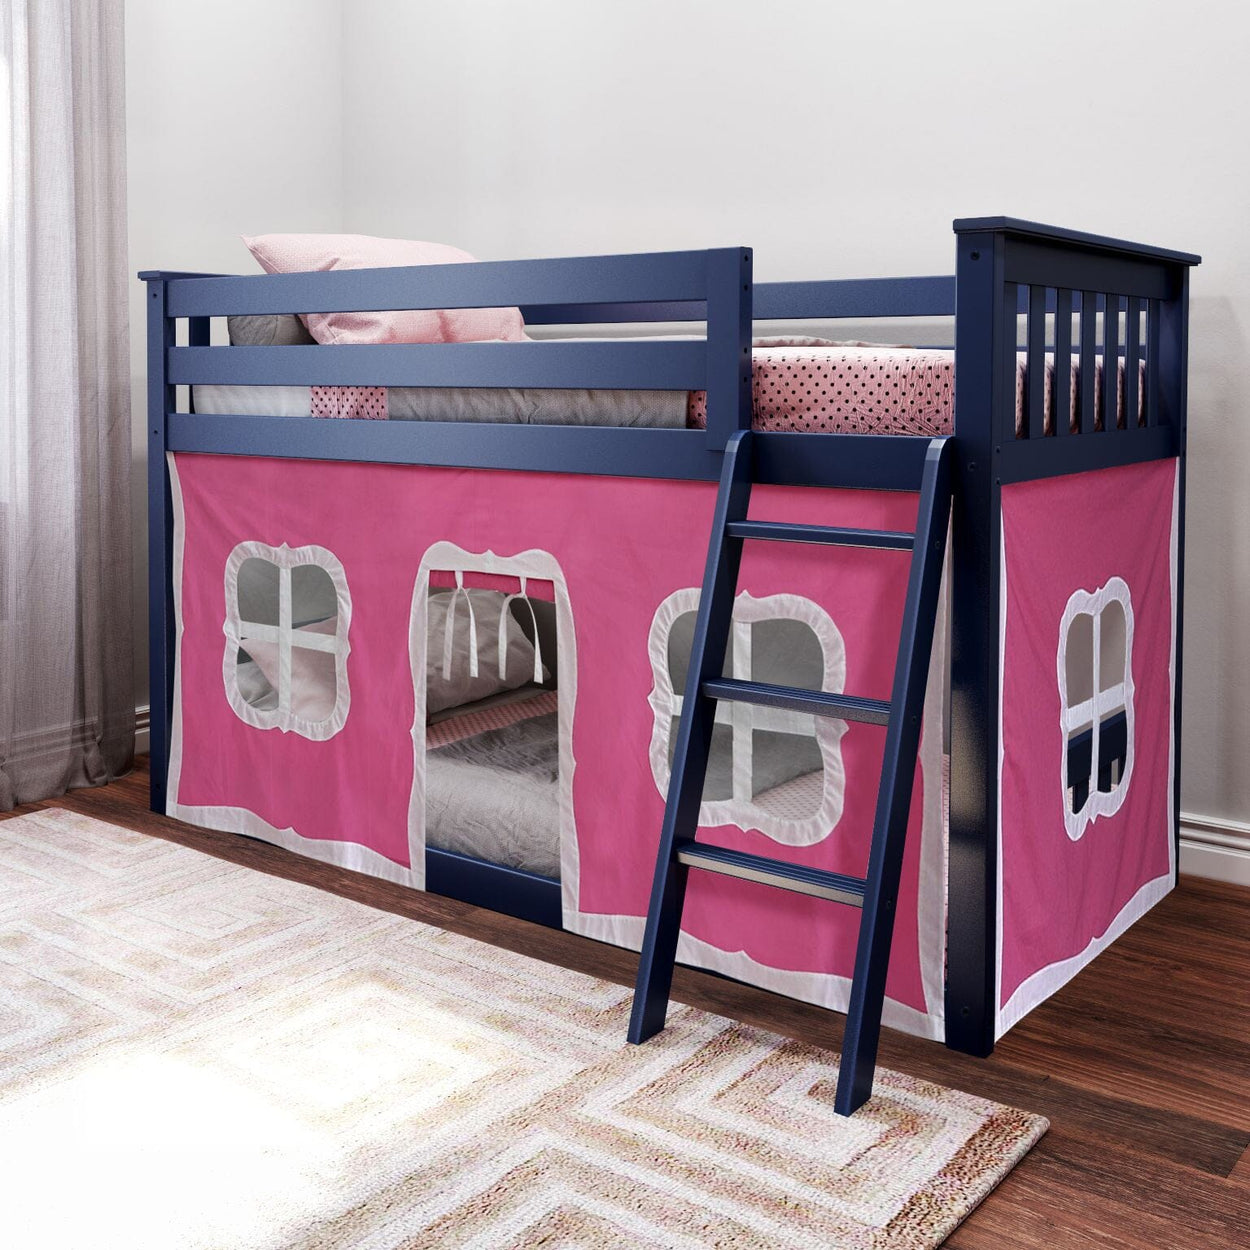 Bunk Beds Max & Lily Twin-Size Low Bunk Bed + Curtain Blue Pink 